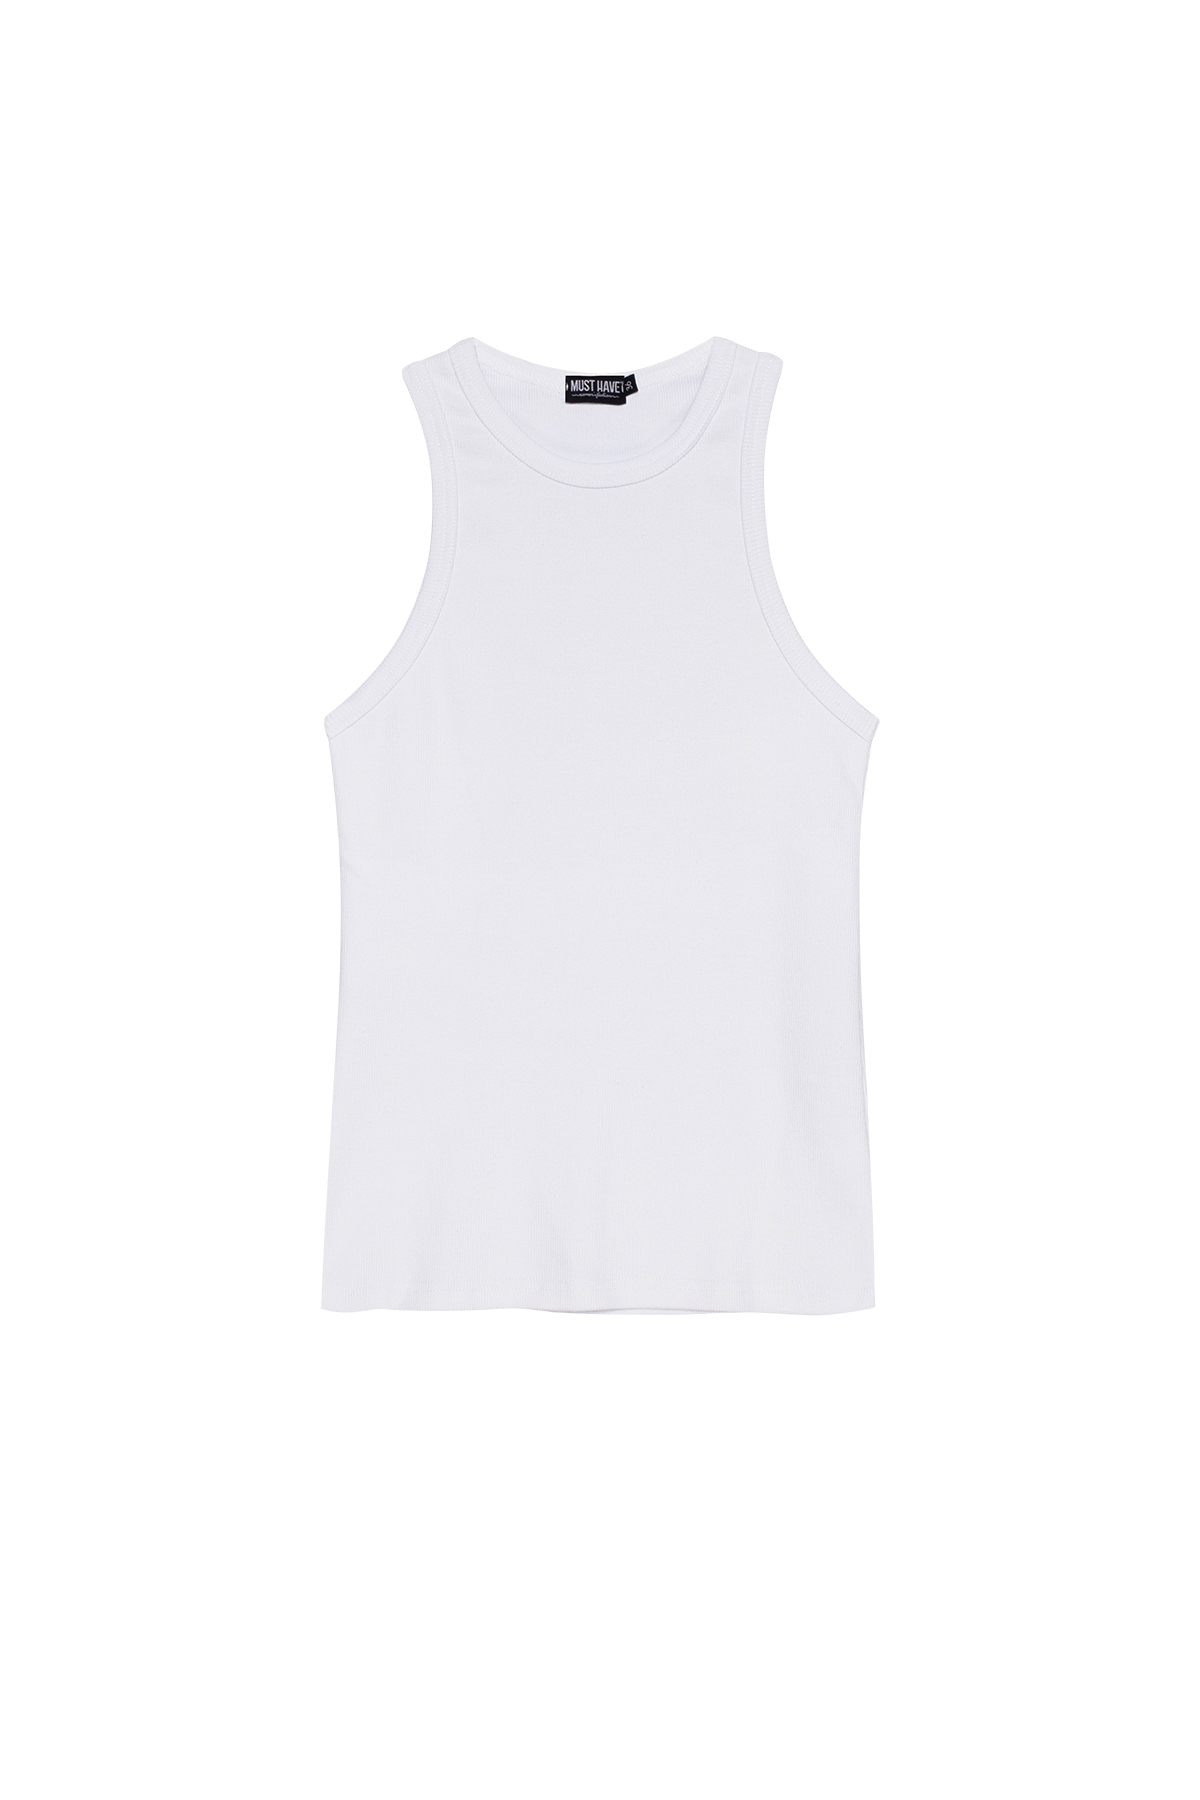 White ribbed jersey oval neck tank top, photo 6